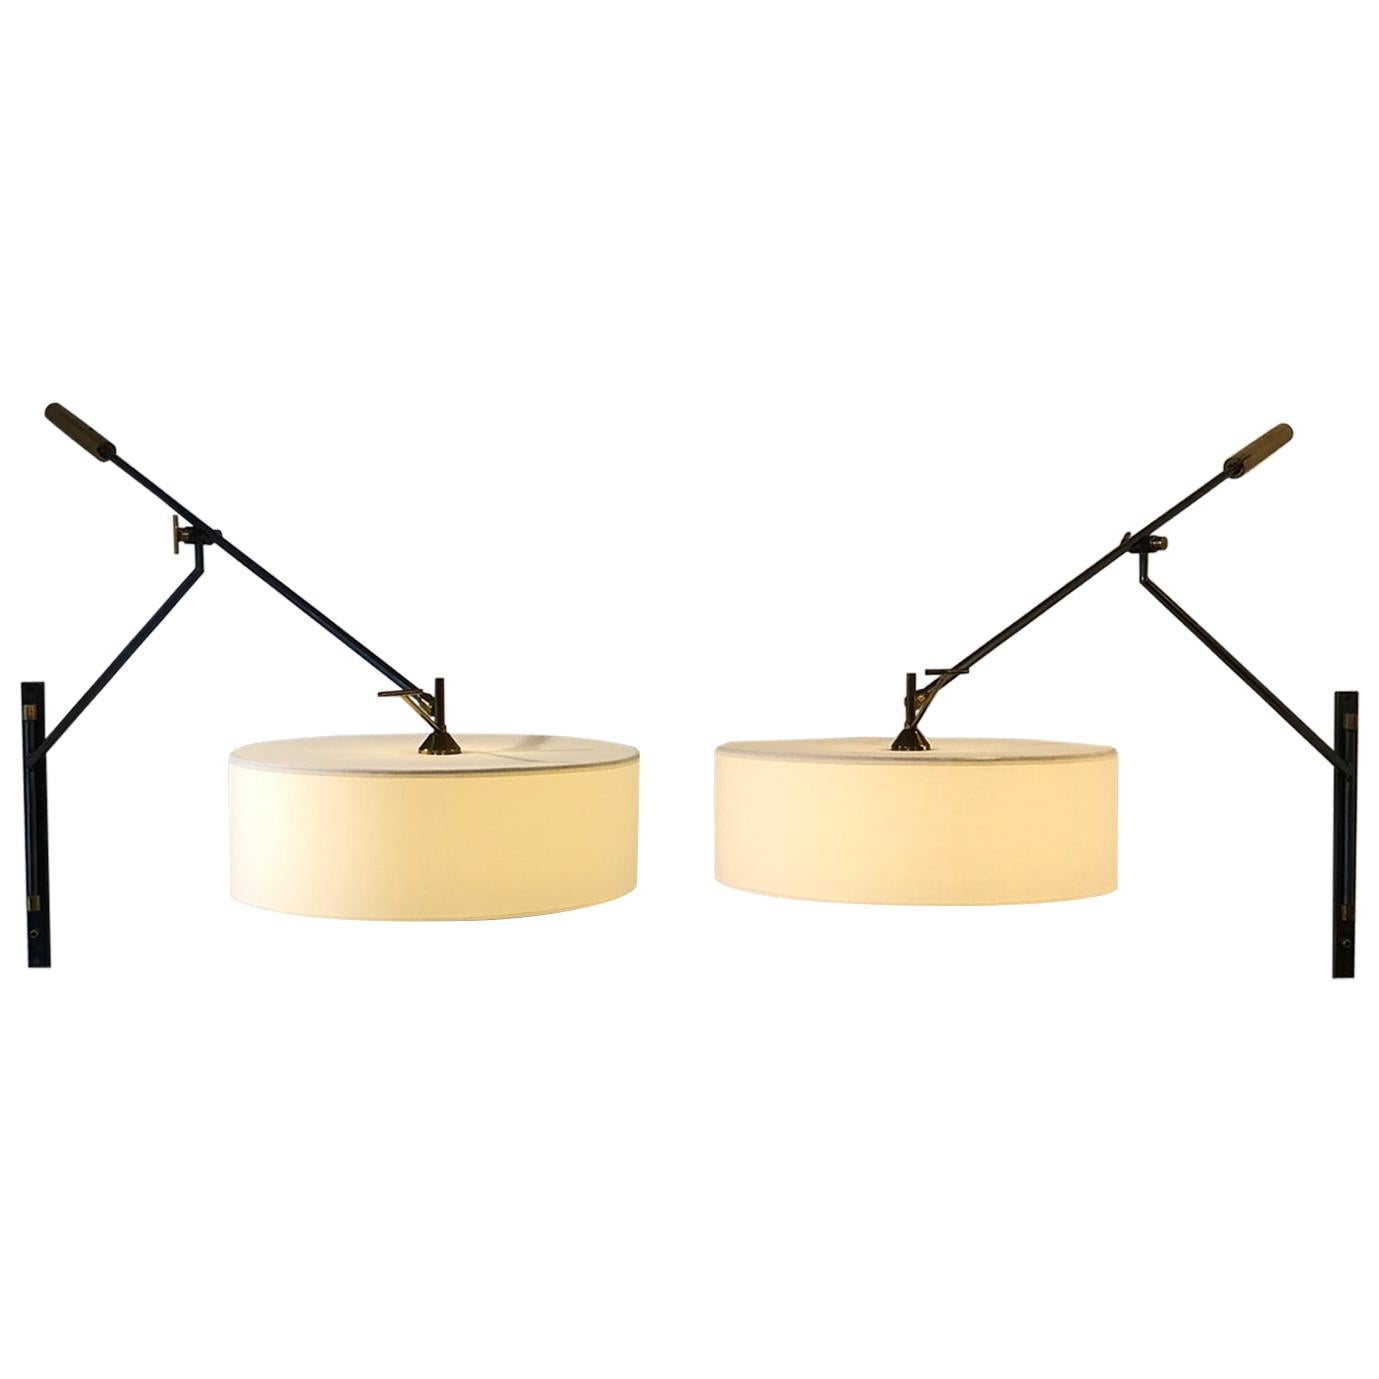 Pair of Wall Lights with Adjustable Counterweight by Lunel, 1950